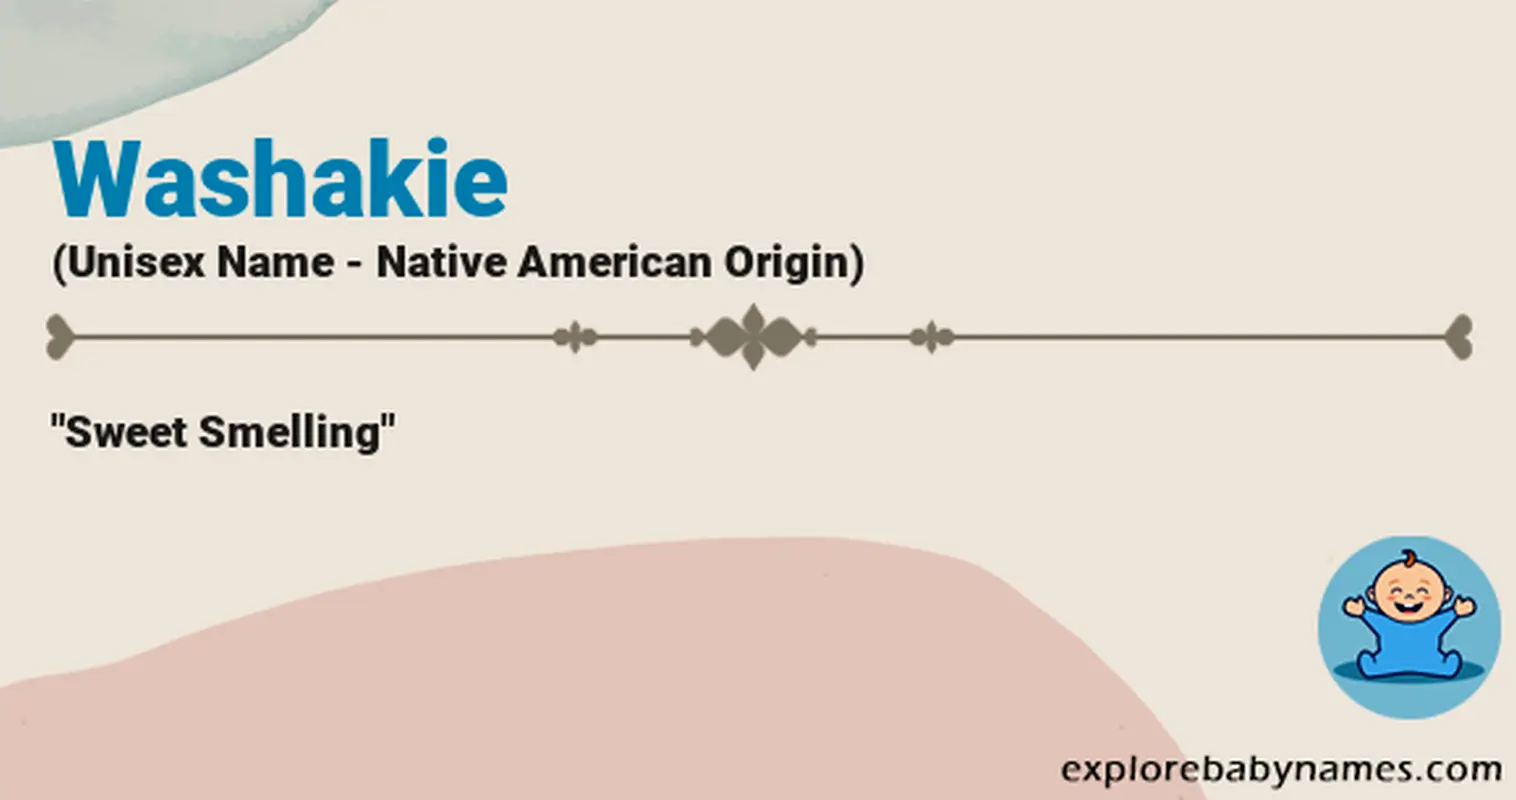 Meaning of Washakie